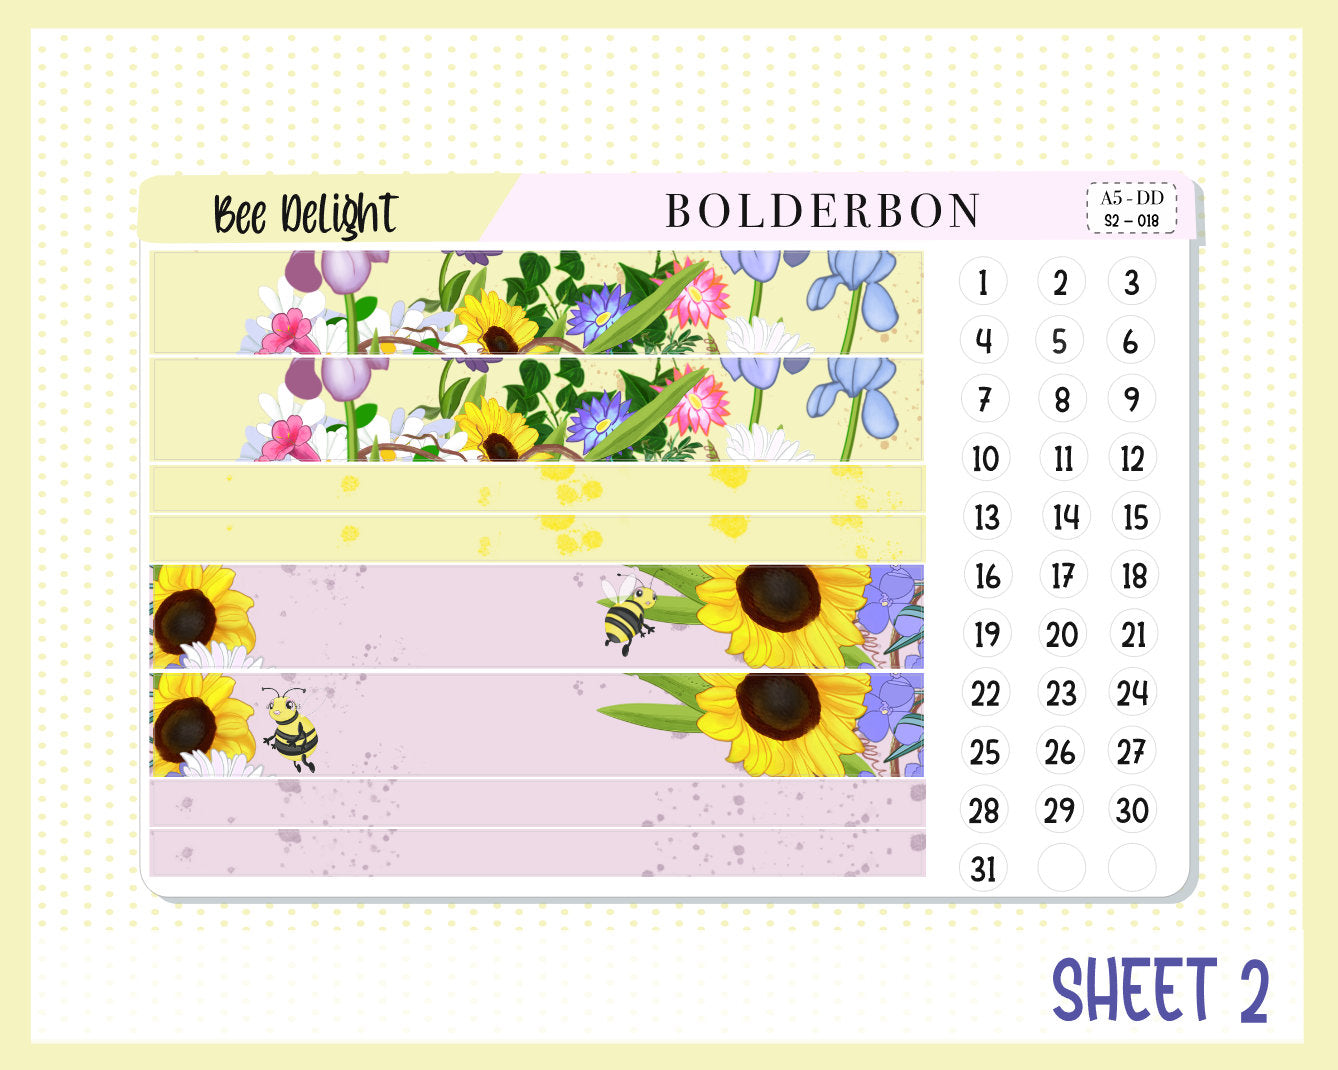 BEE DELIGHT || A5 Daily Duo Planner Sticker Kit